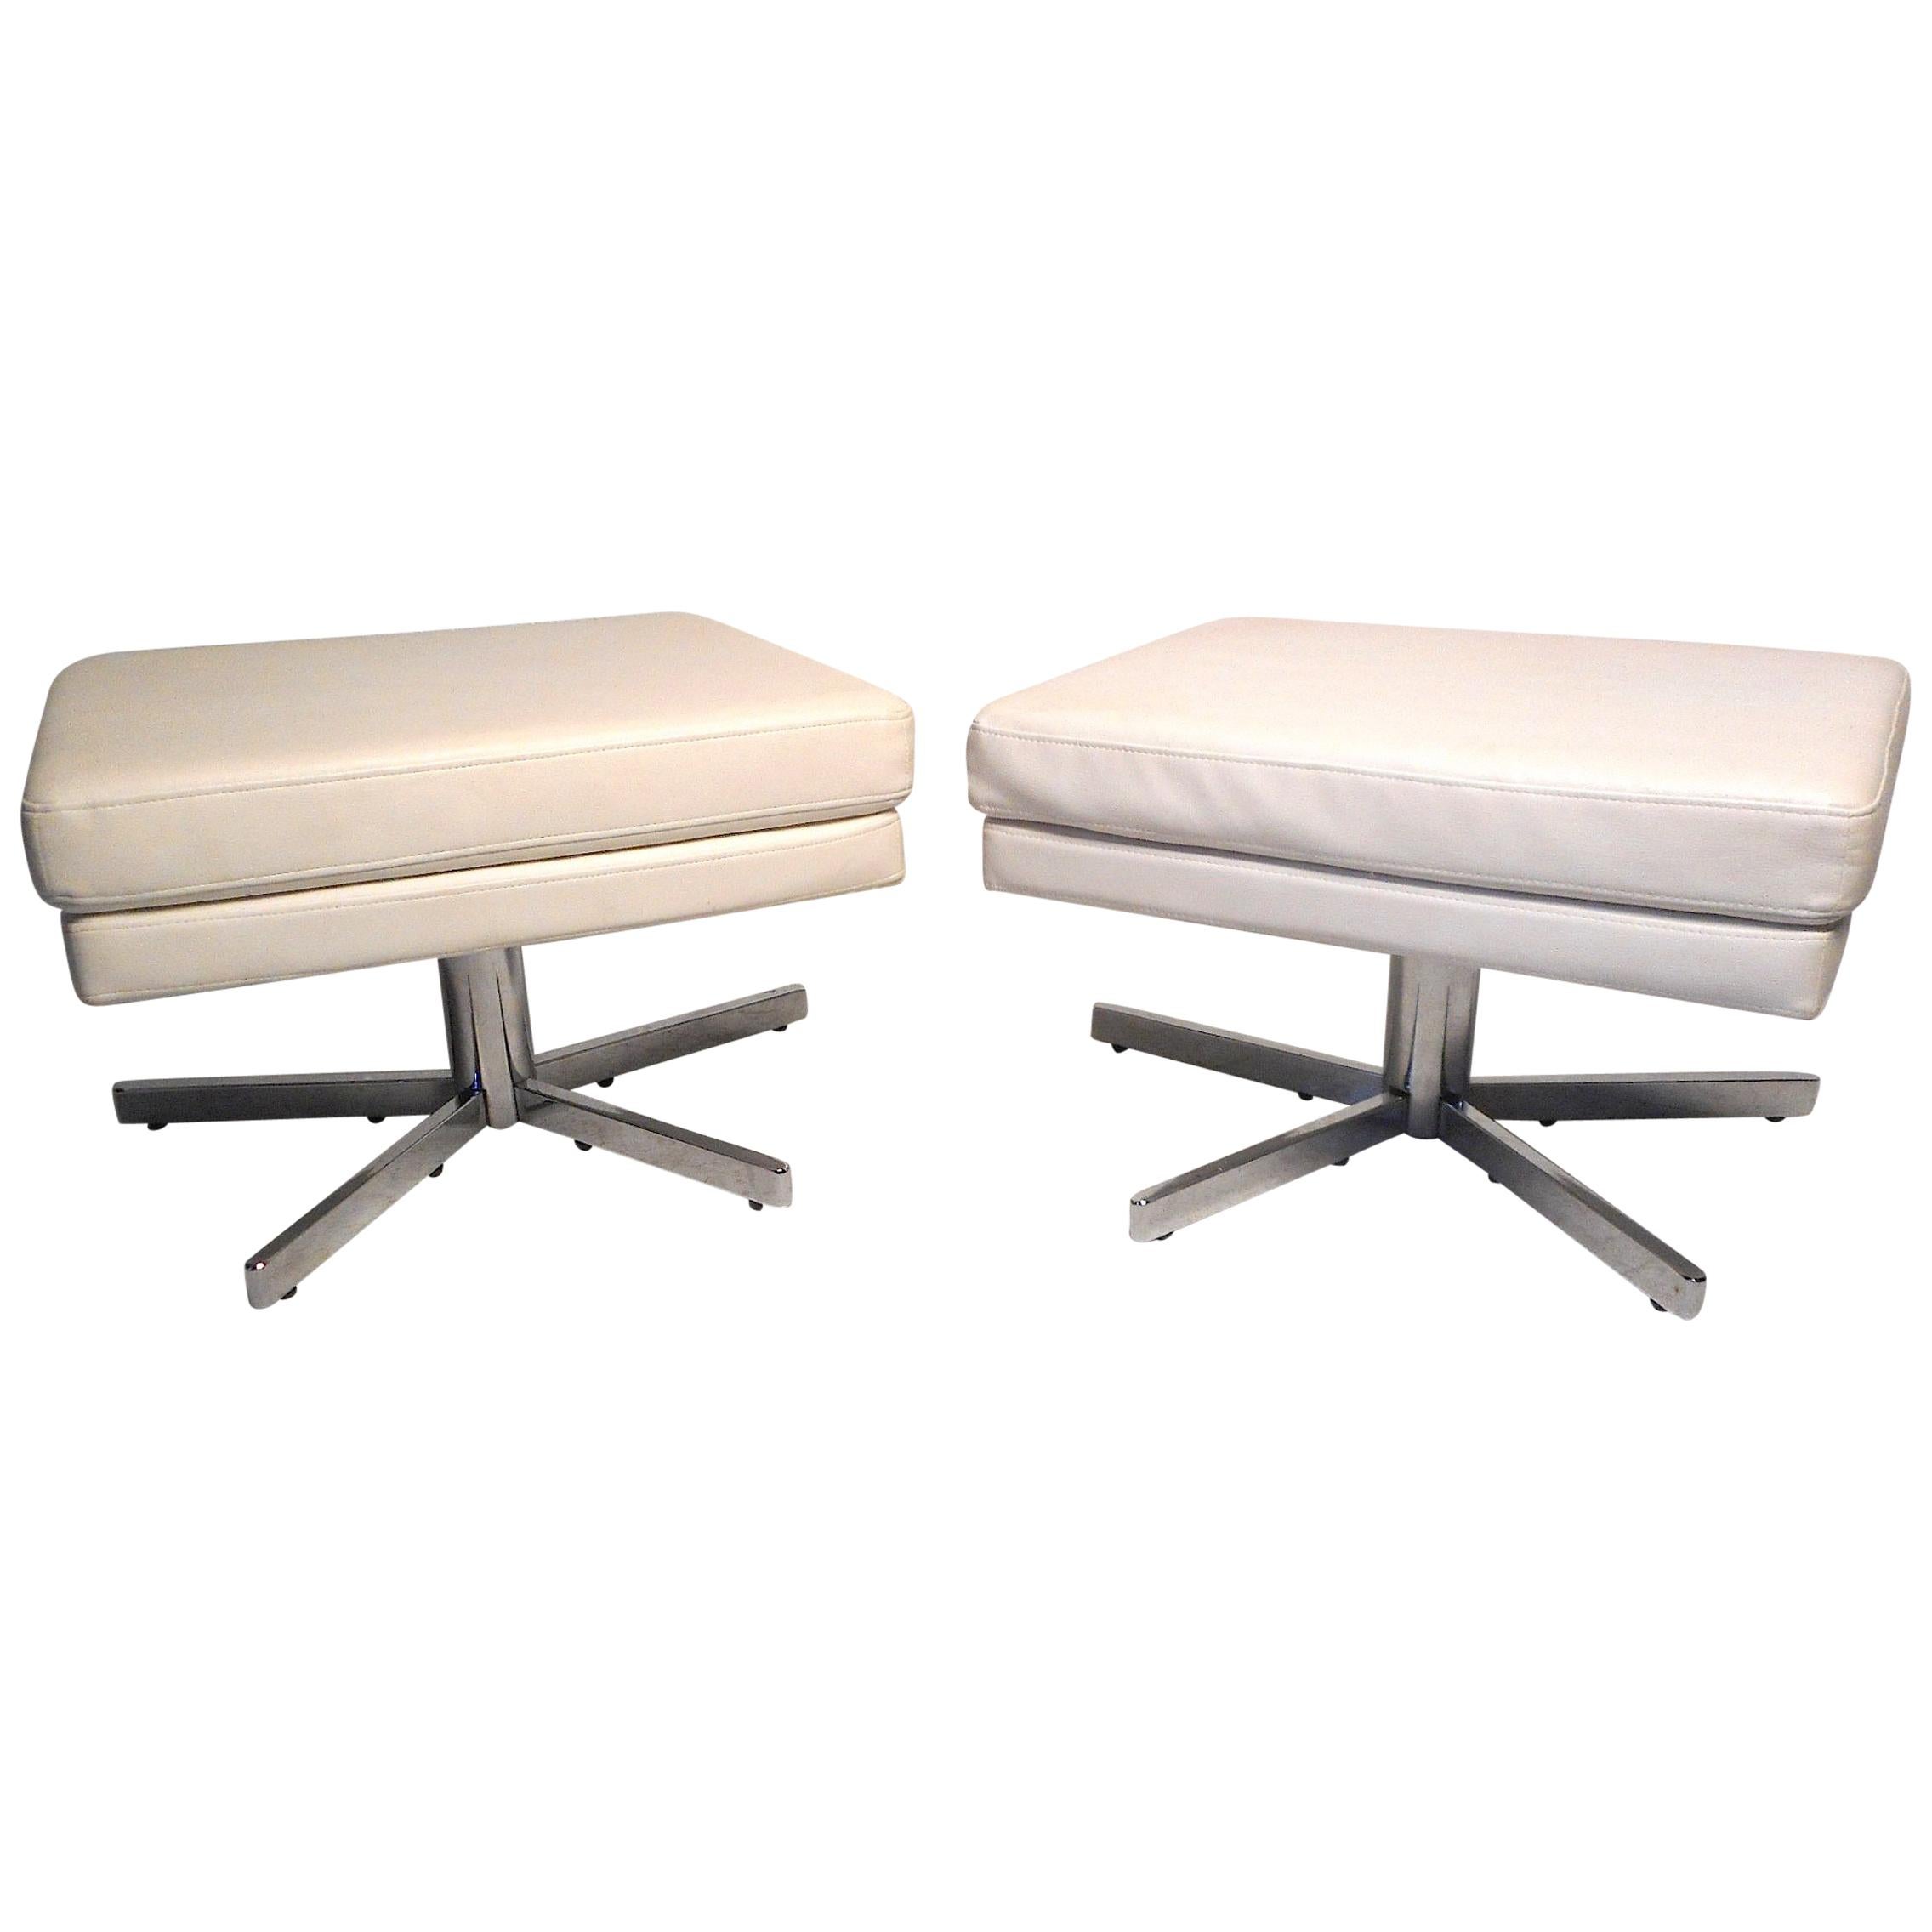 Pair of Midcentury Swiveling Ottomans For Sale